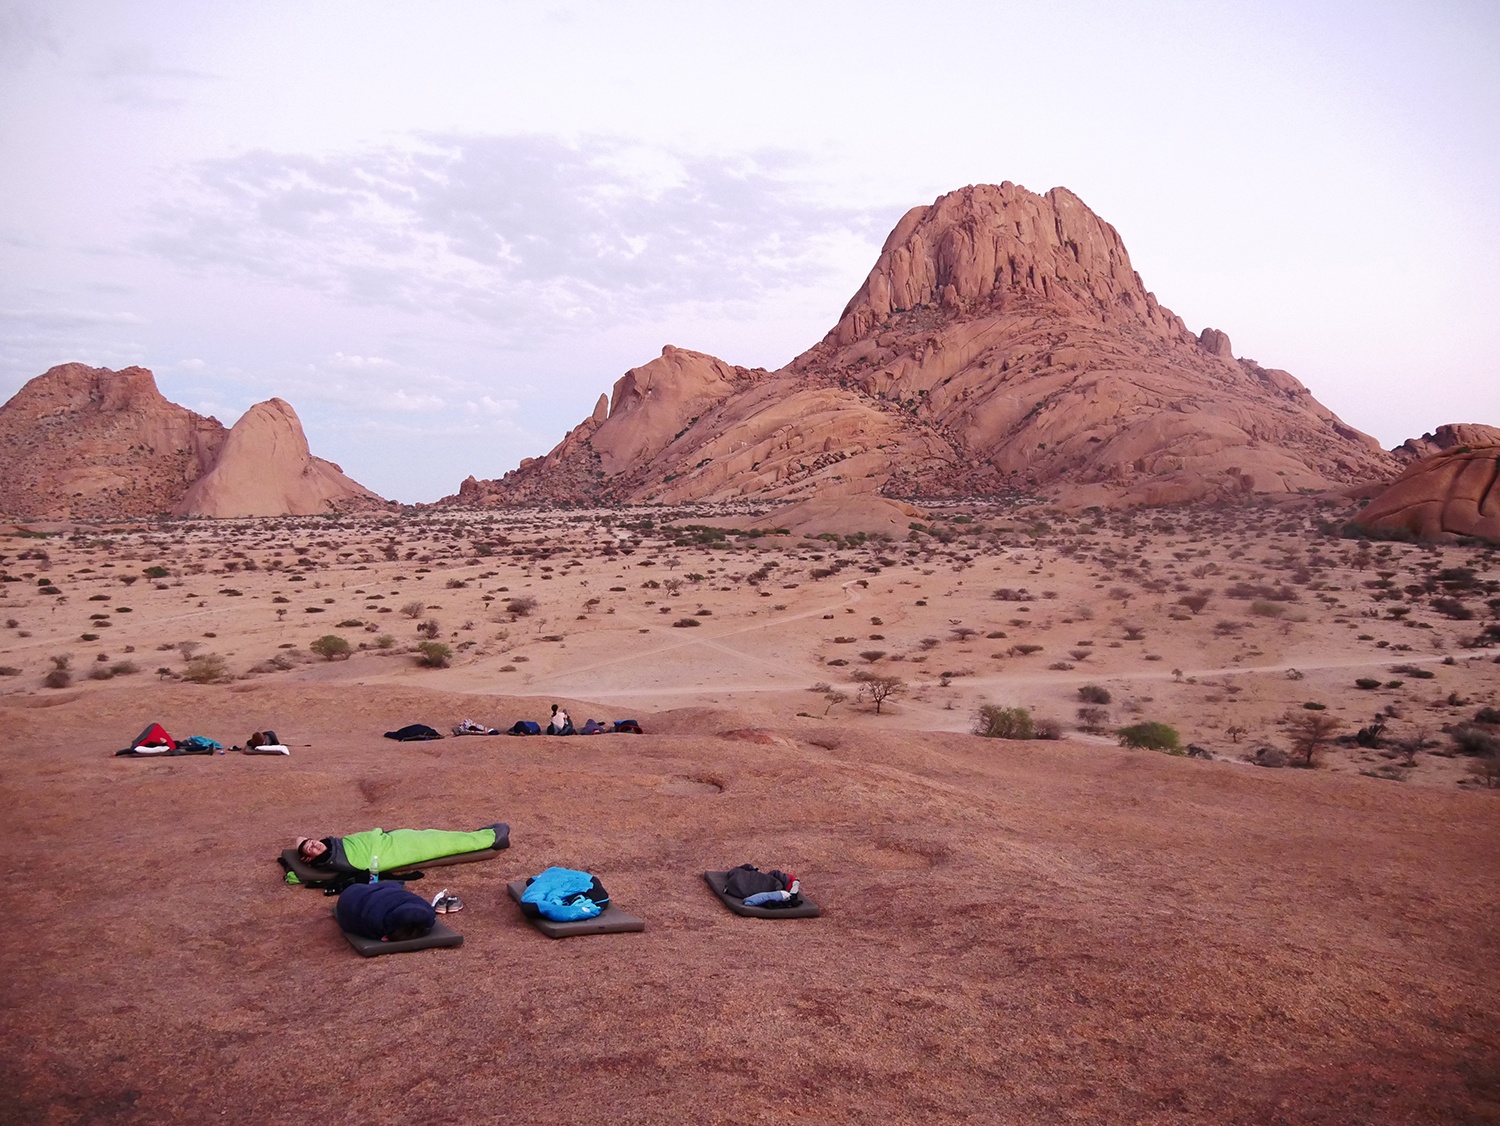 A tough but spectacular camp trip under the Spitzkoppe (Namibia)